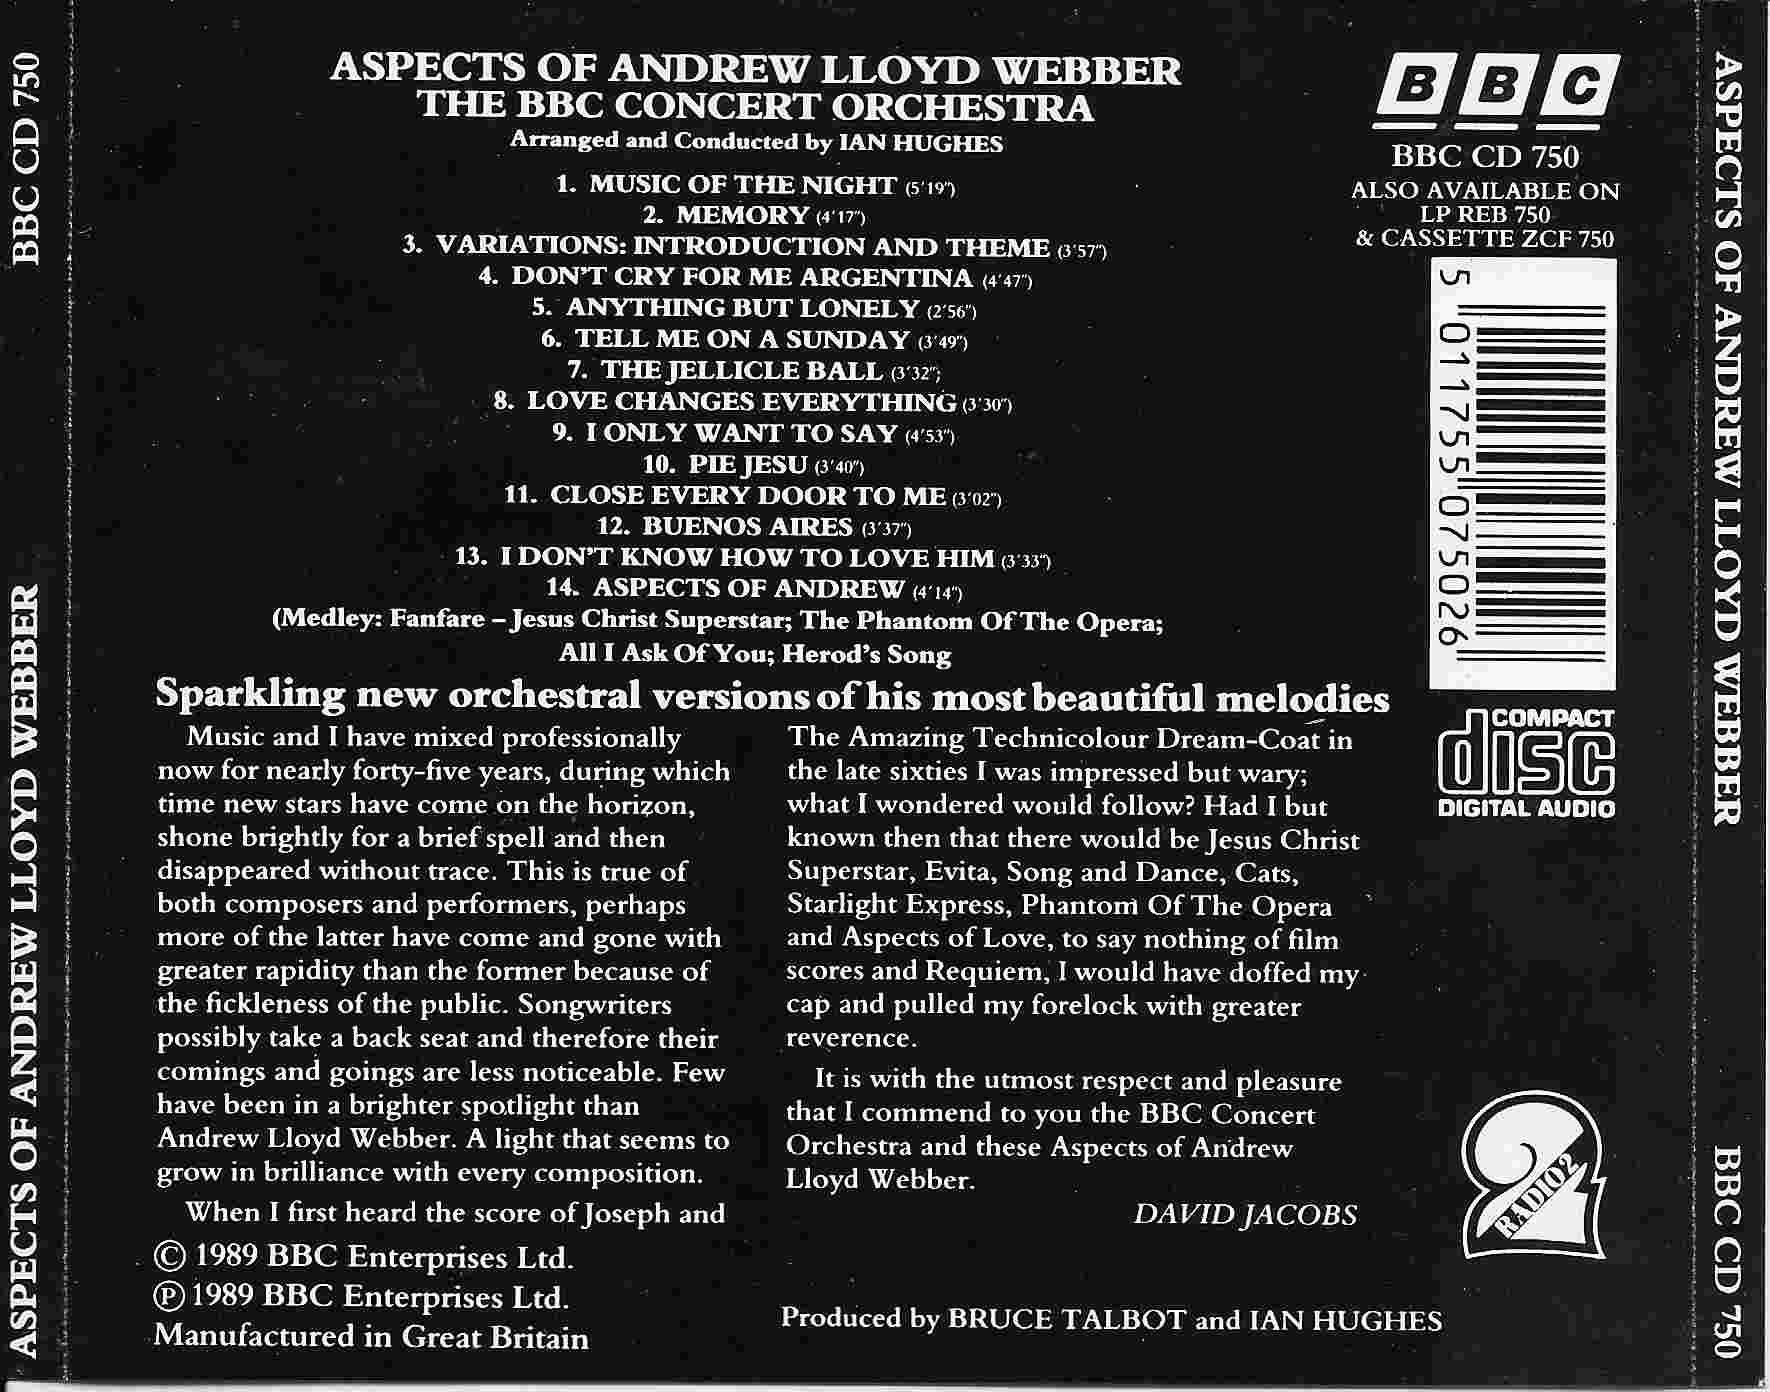 Picture of BBCCD750 Aspects of Lloyd Webber by artist Andrew Lloyd Webber from the BBC records and Tapes library